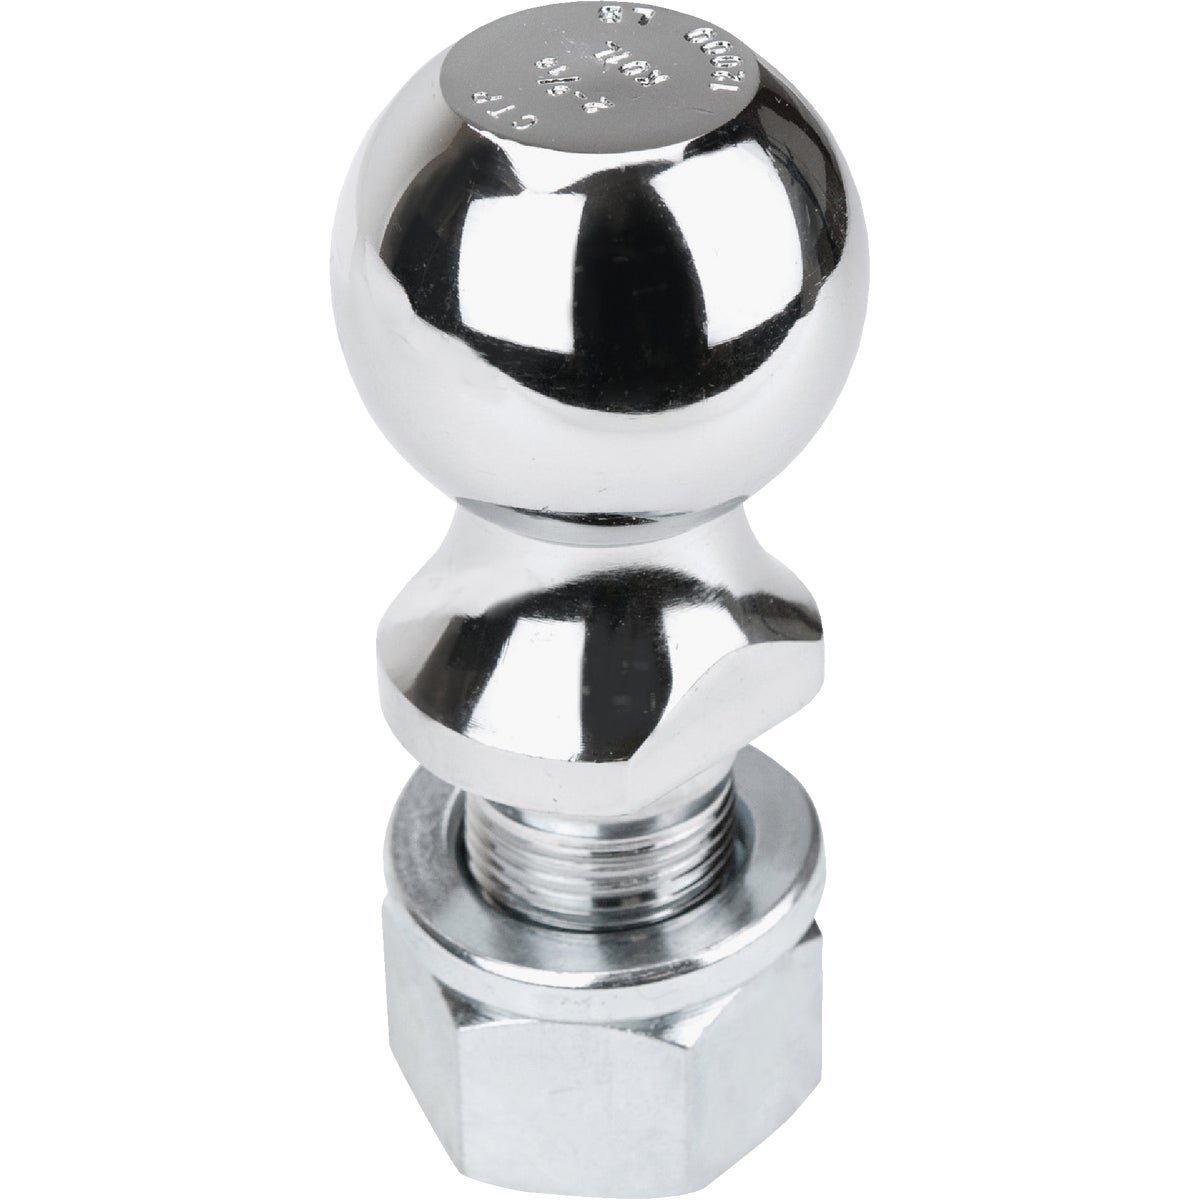 Reese Towpower Class V Hitch Ball, 2-5/16 In. x 1-1/4 In. x 2 In.